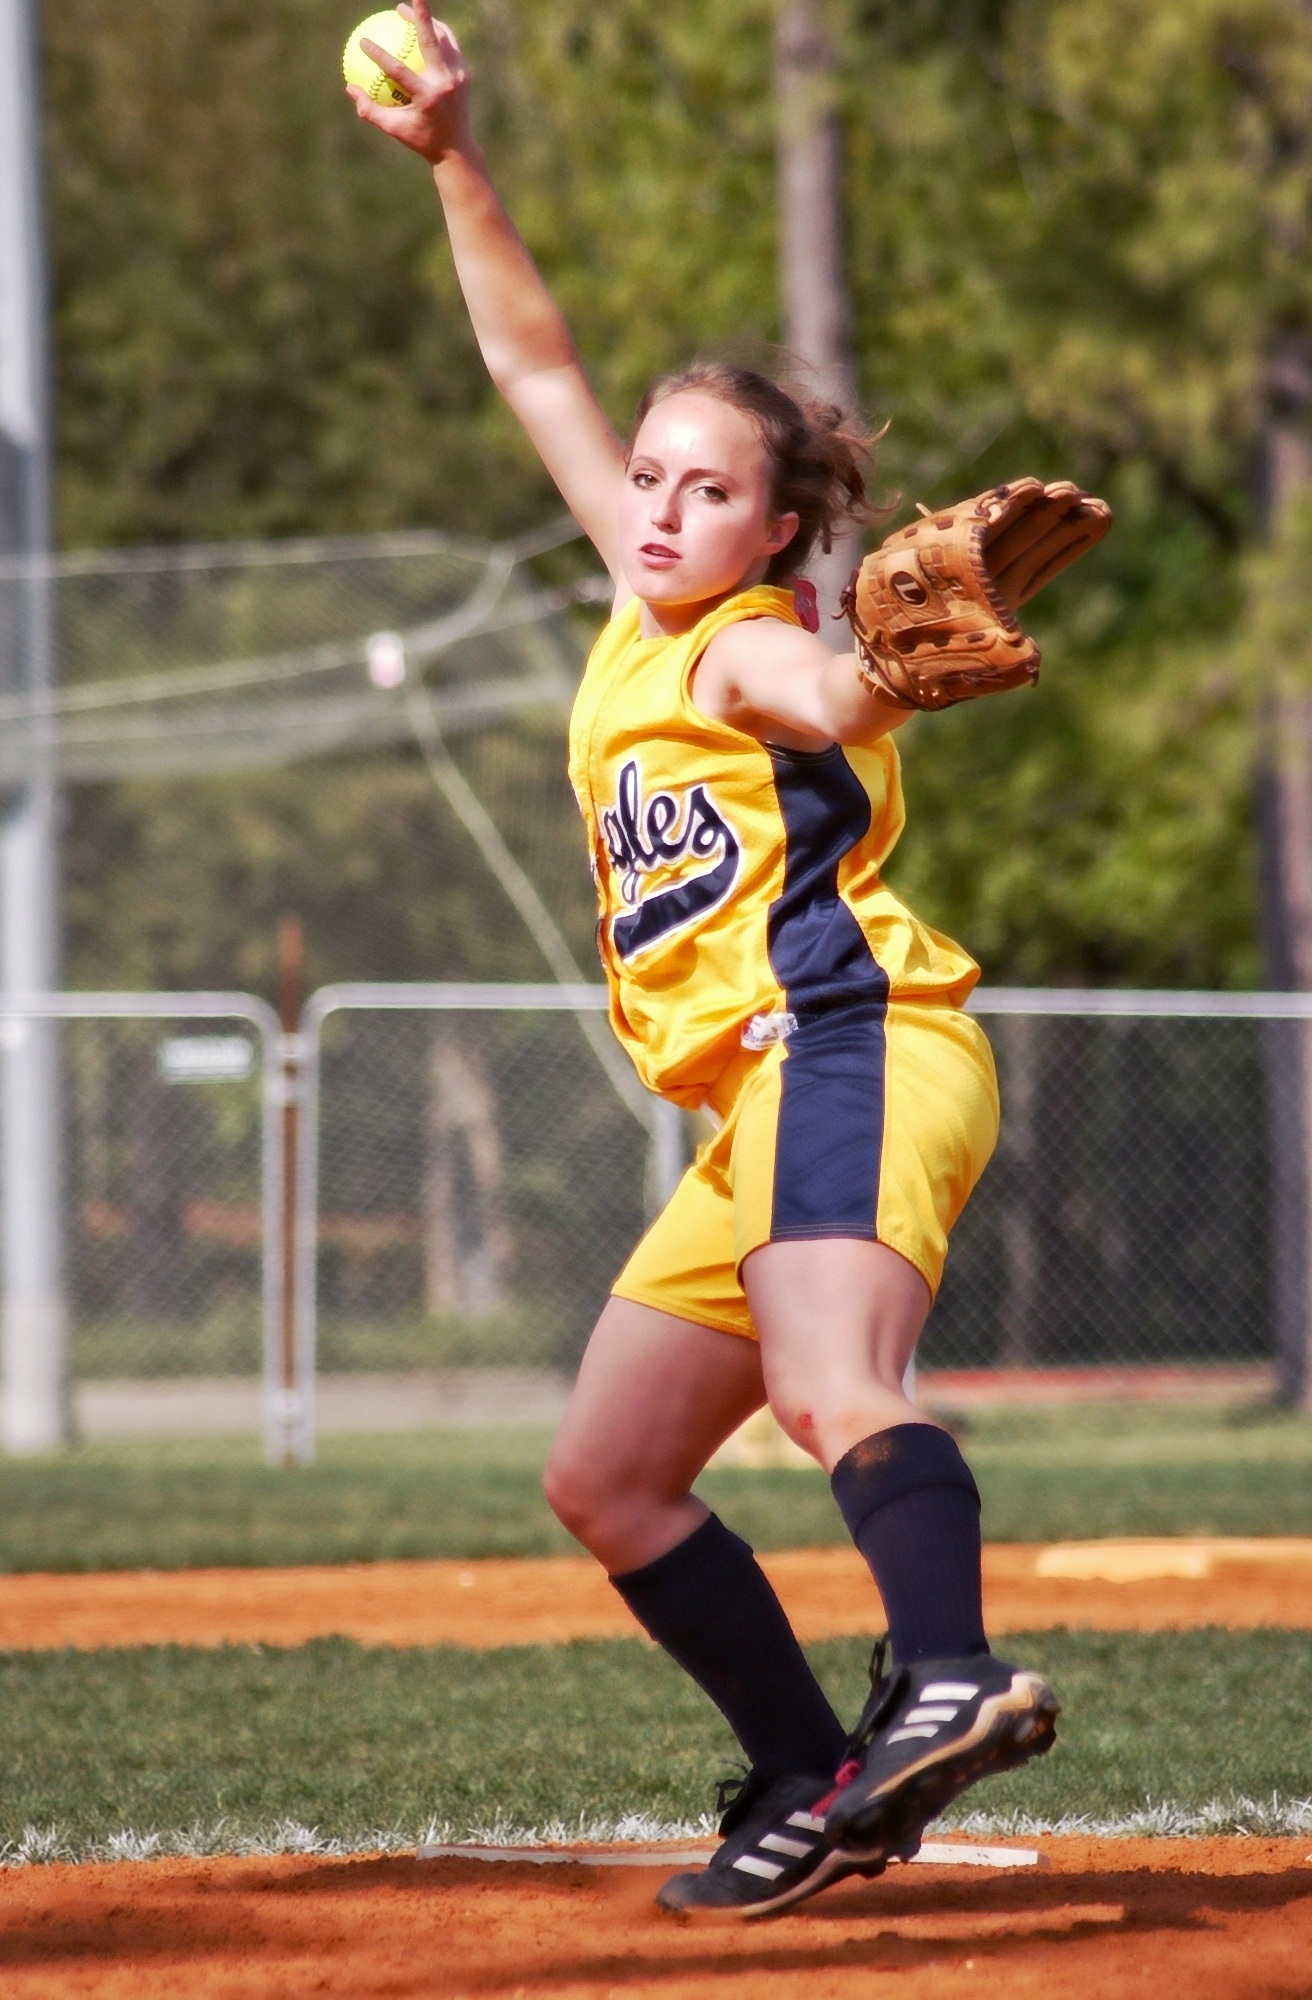 Softball Pitcher, Female player throwing ball free image download